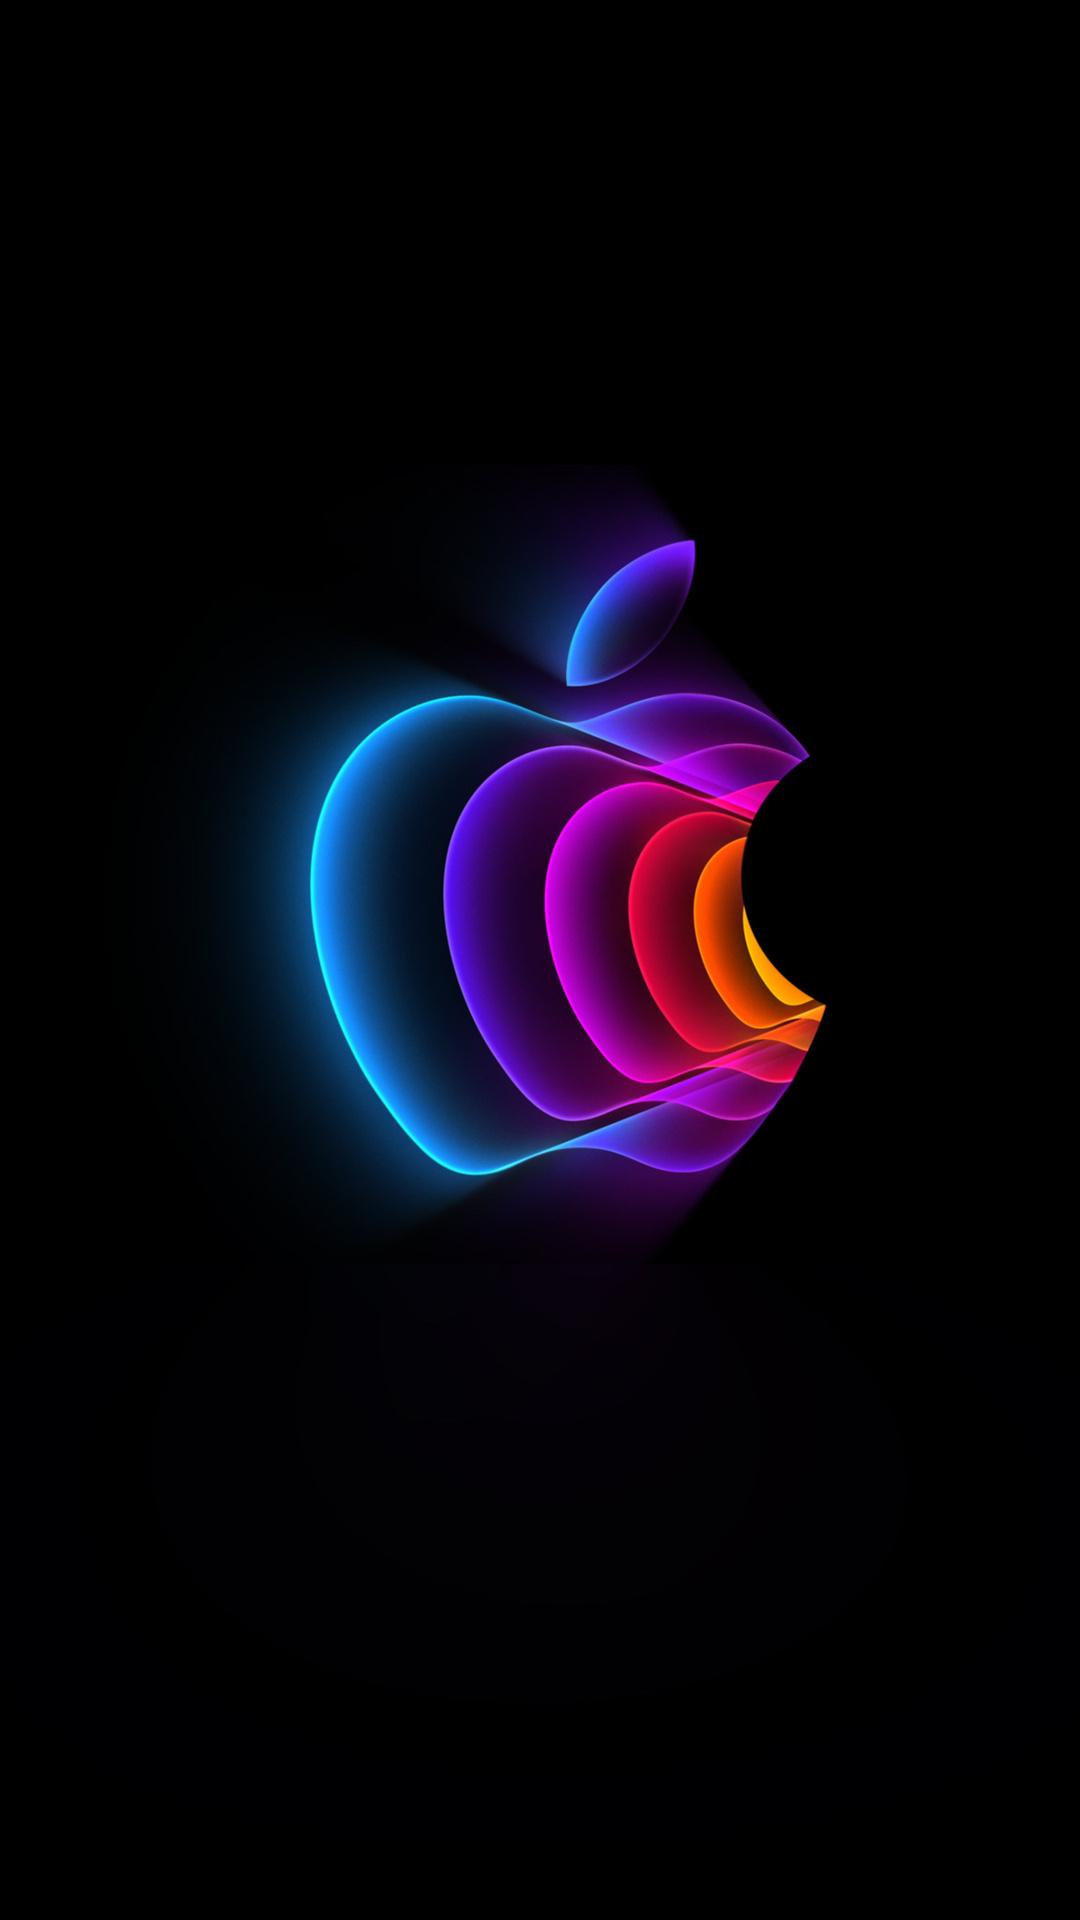 1080x1920 Apple Logo Inc Iphone 7,6s,6 Plus, Pixel xl ,One Plus 3,3t,5 HD  4k Wallpapers, Images, Backgrounds, Photos and Pictures